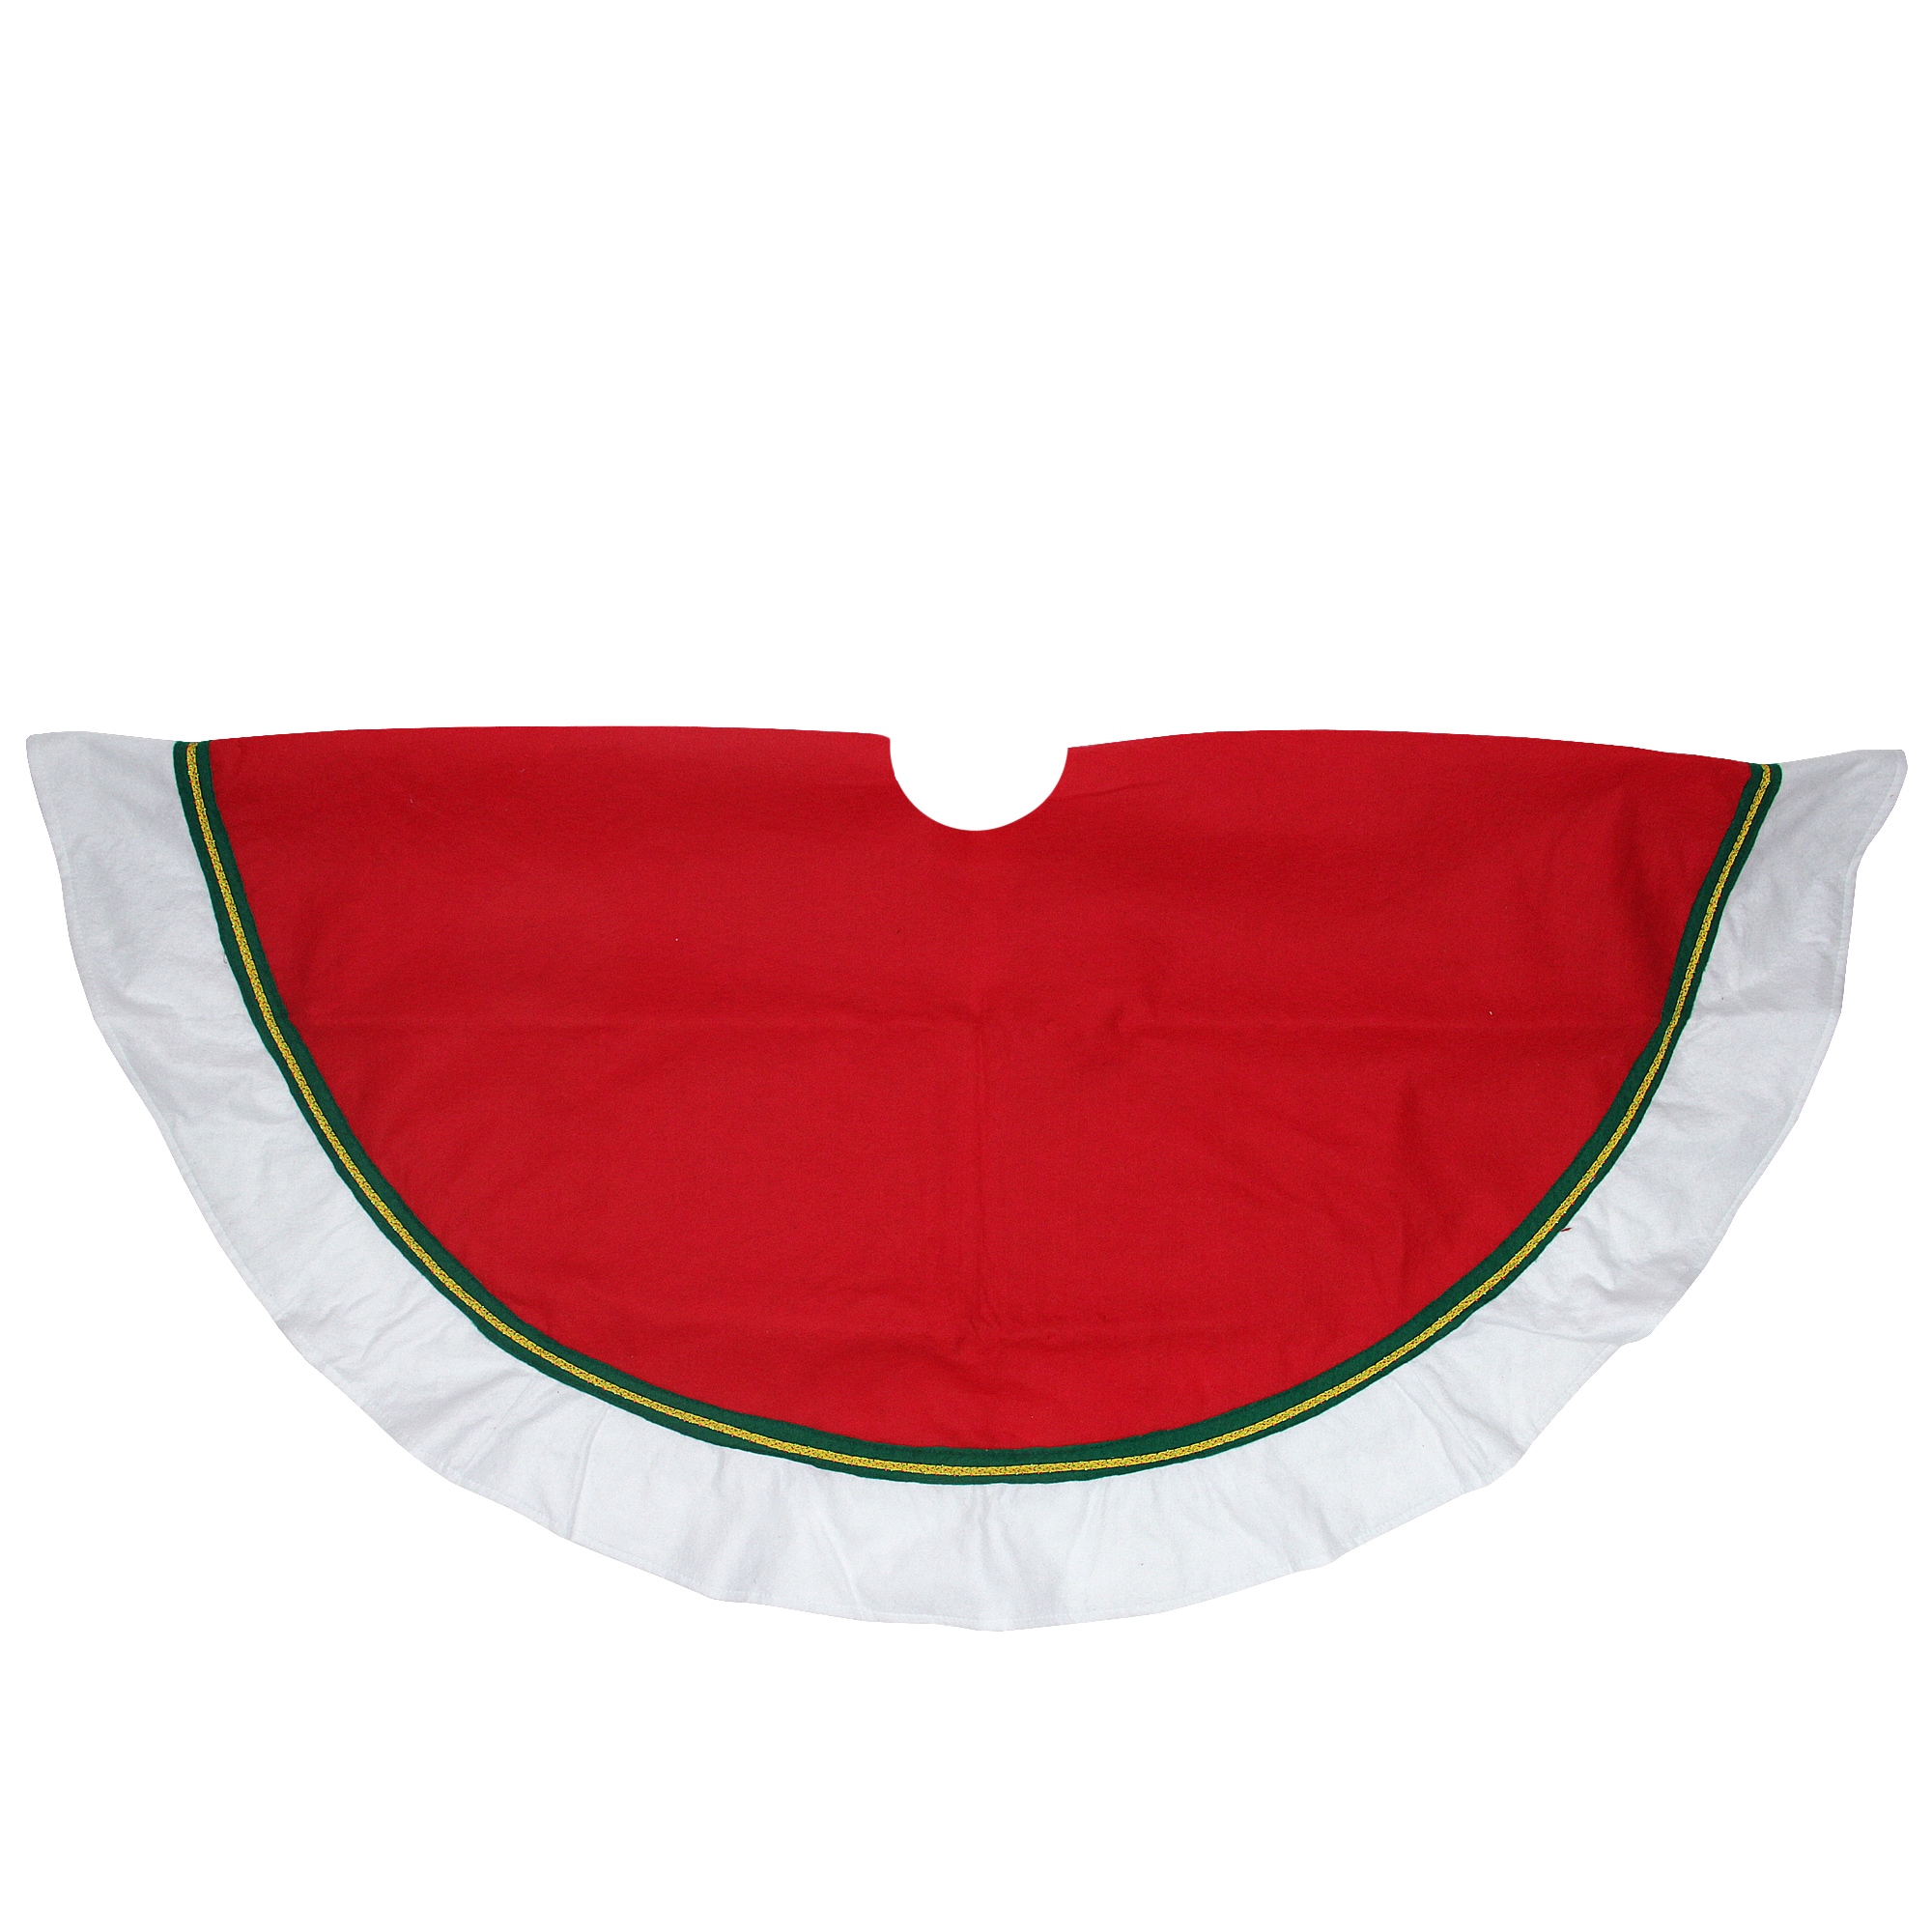 36 Inch Christmas Tree Skirts & Collars at Lowes.com